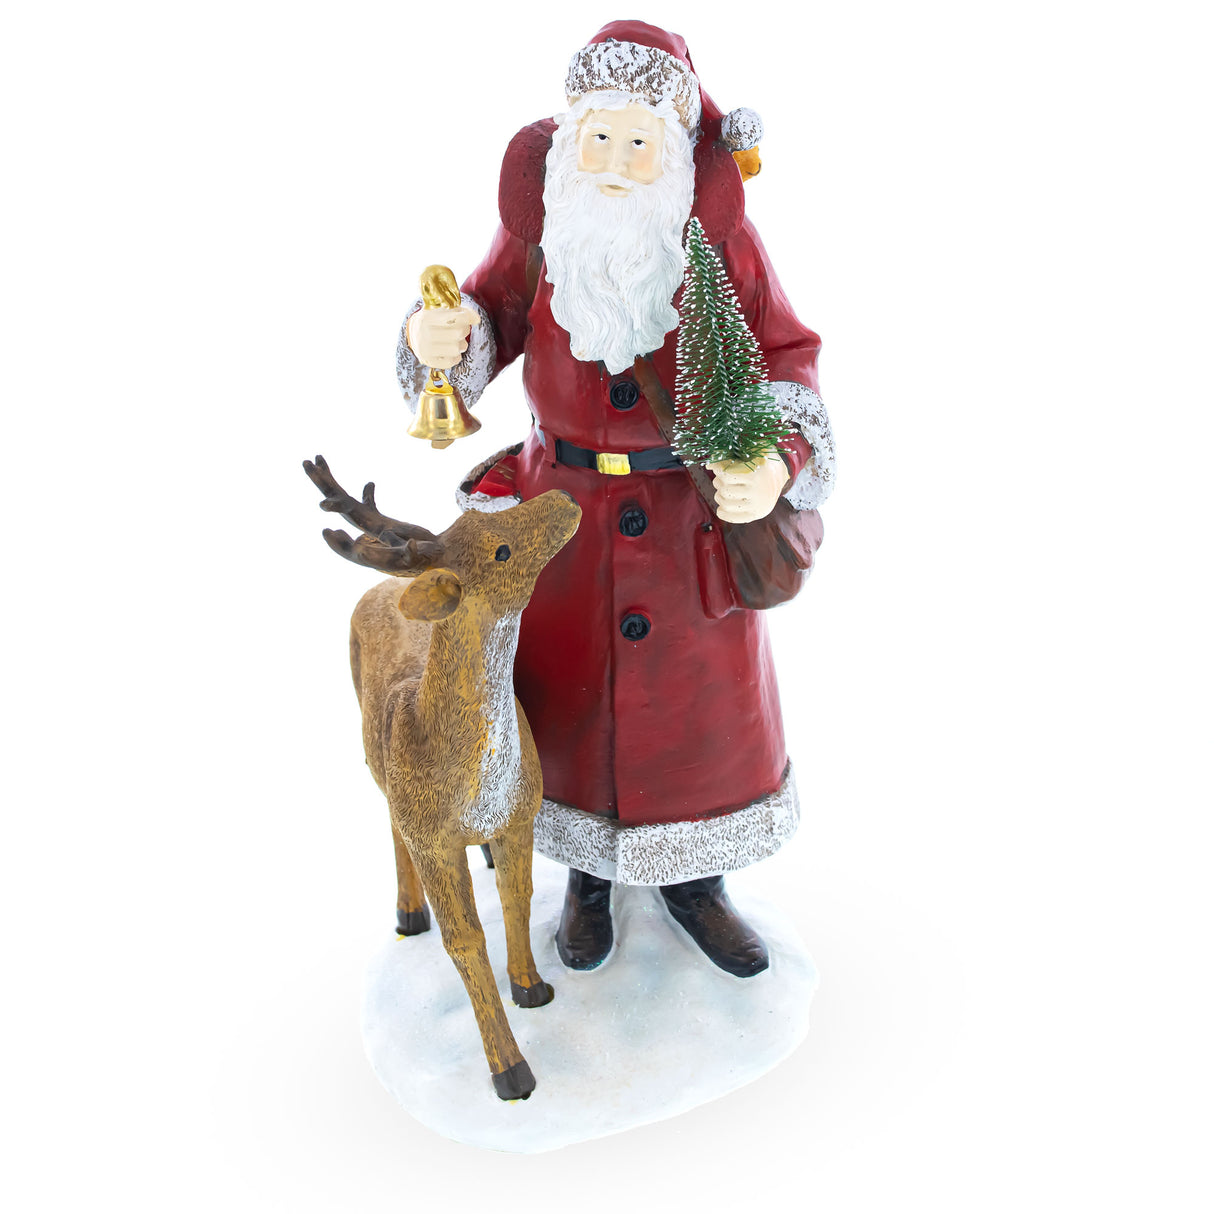 Resin Santa Holding Christmas Tree and Bell by Reindeer Figurine 12 Inches in Red color